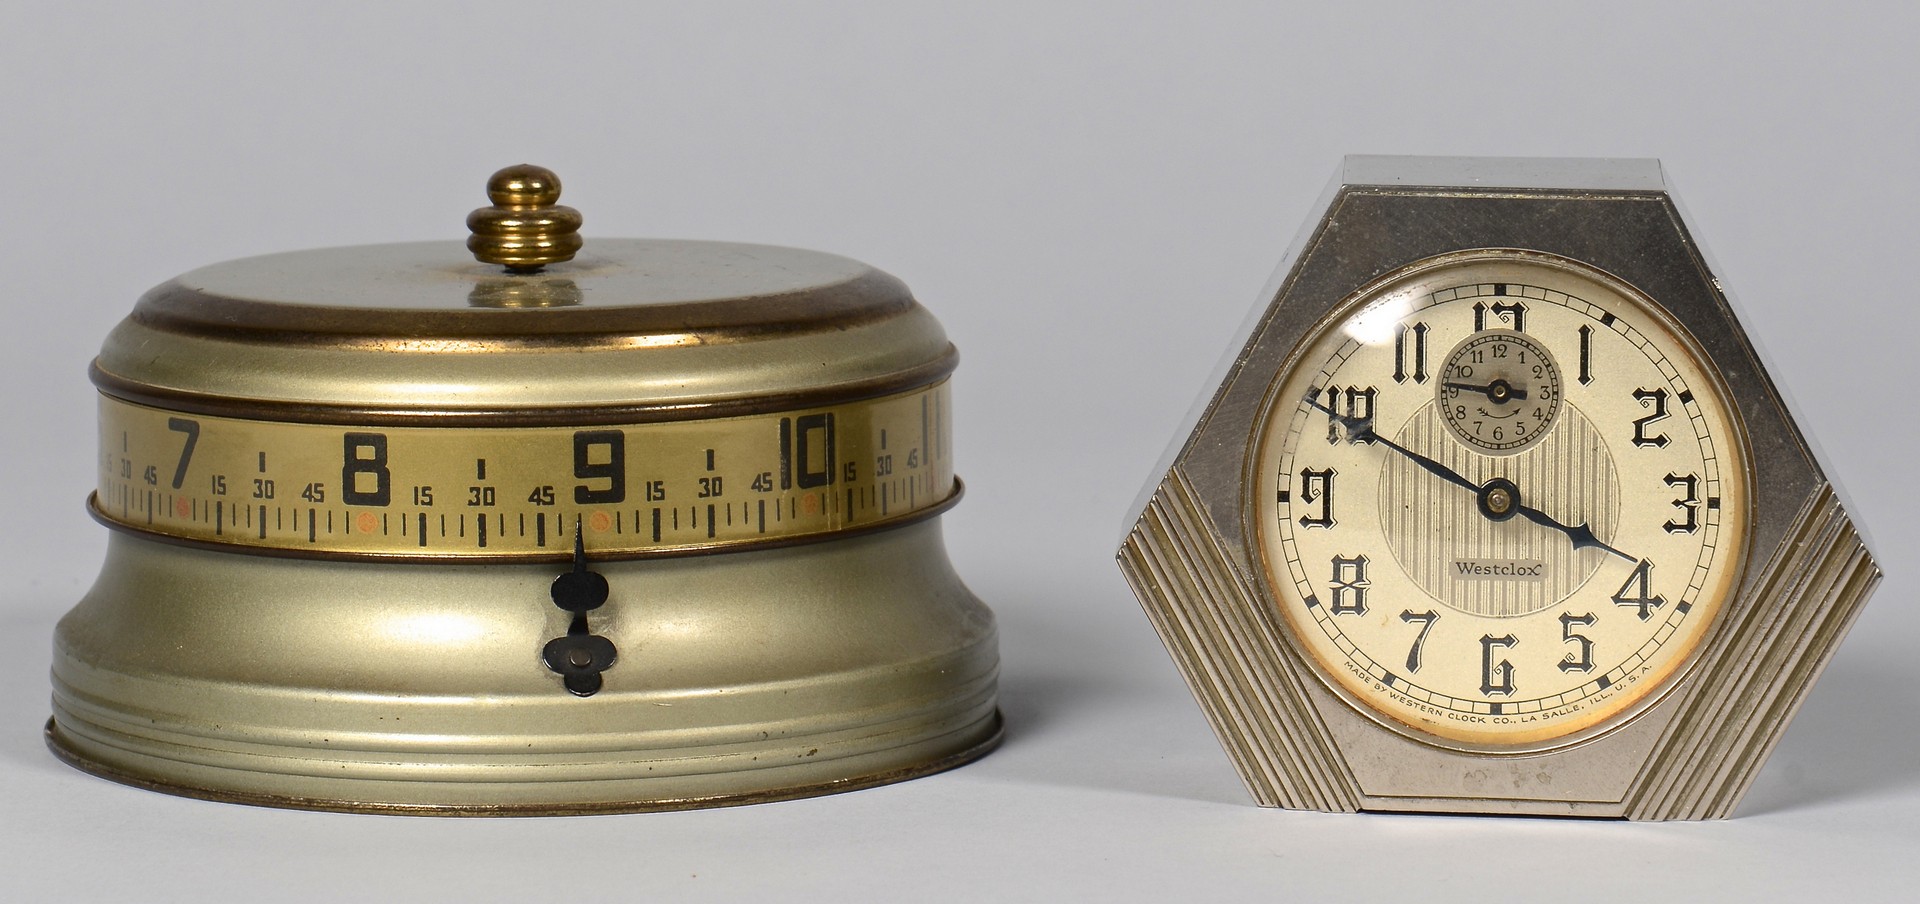 Lot 899: Vintage Clocks and Measuring Devices